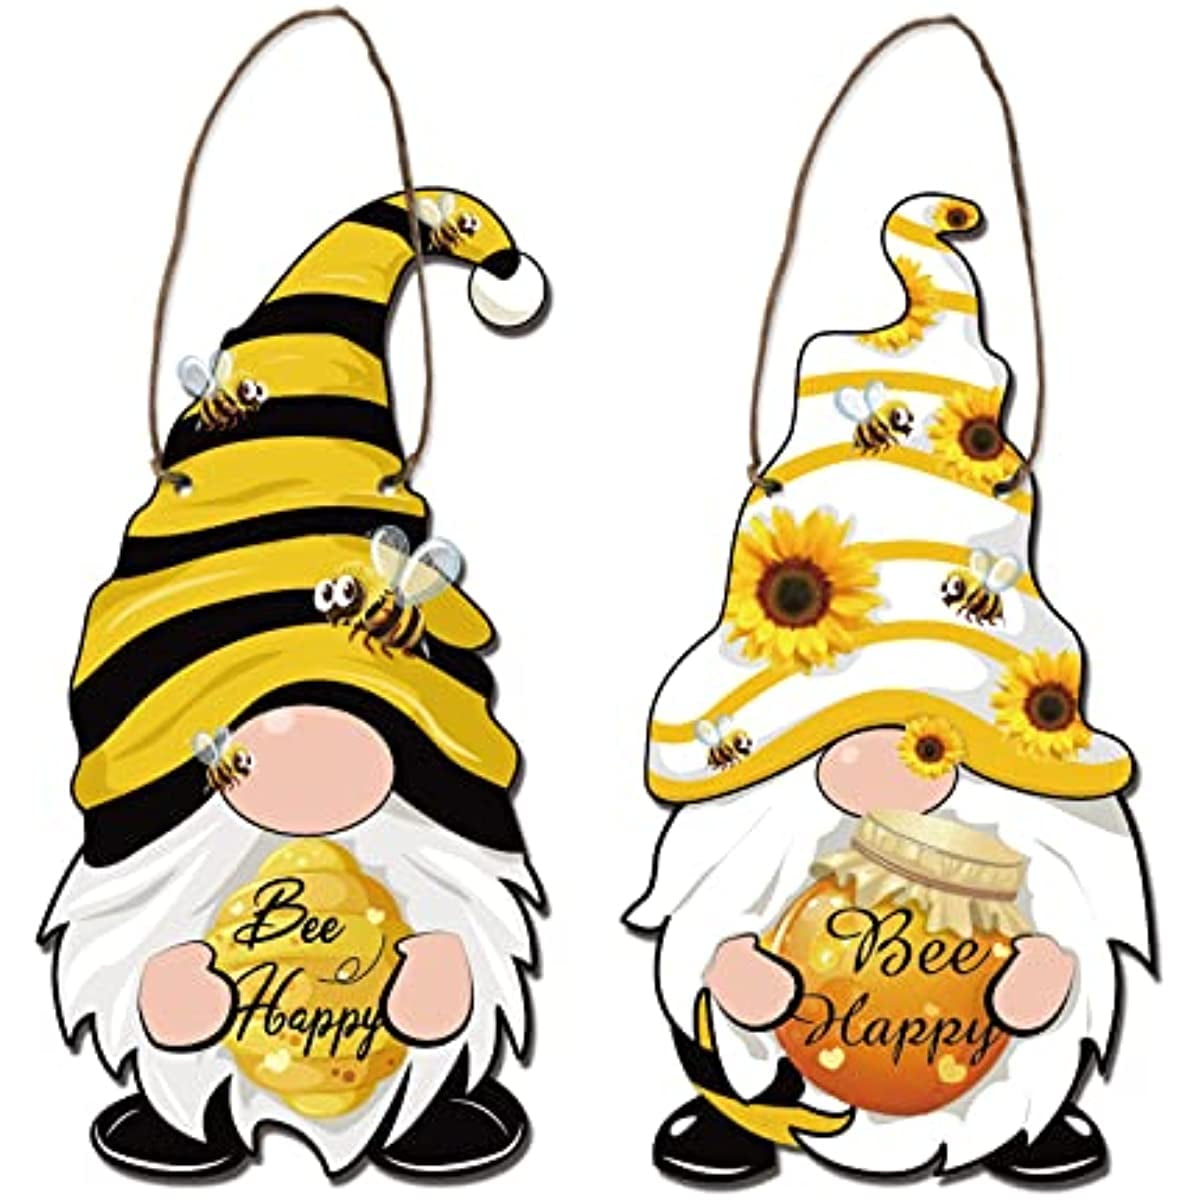 Hodao 3 PCS Bumble Bee Spring Gnome Decorations Honey Bee Gnomes Ornaments  World Bee Day Decorations Gifts Fall Thanksgiving Gnomes Figurines Honey